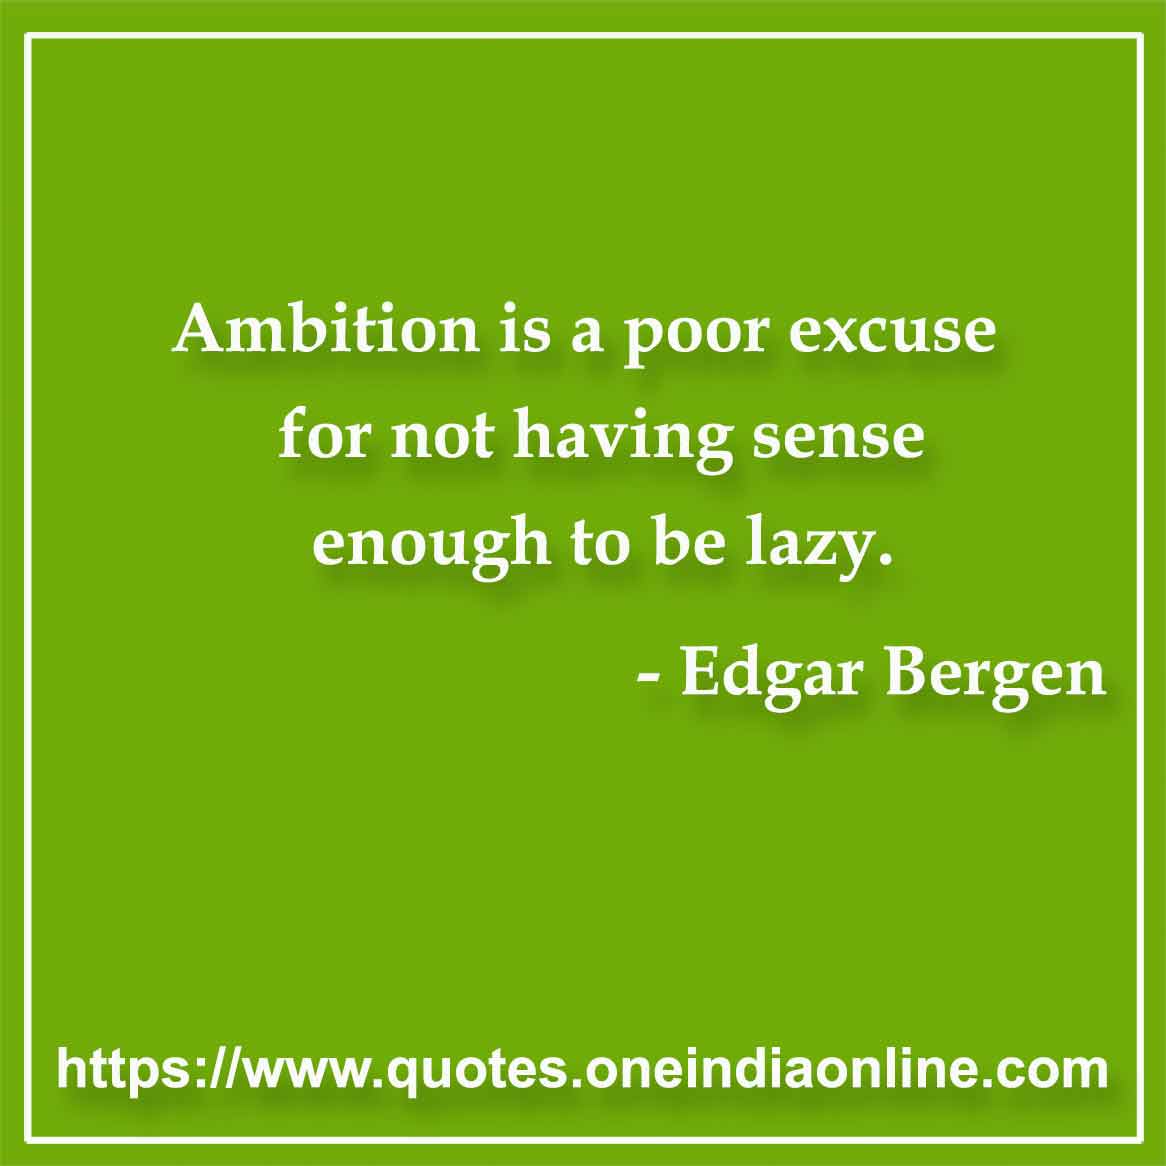 Ambition is a poor excuse for not having sense enough to be lazy.

- Lazy Quotes by Edgar Bergen 